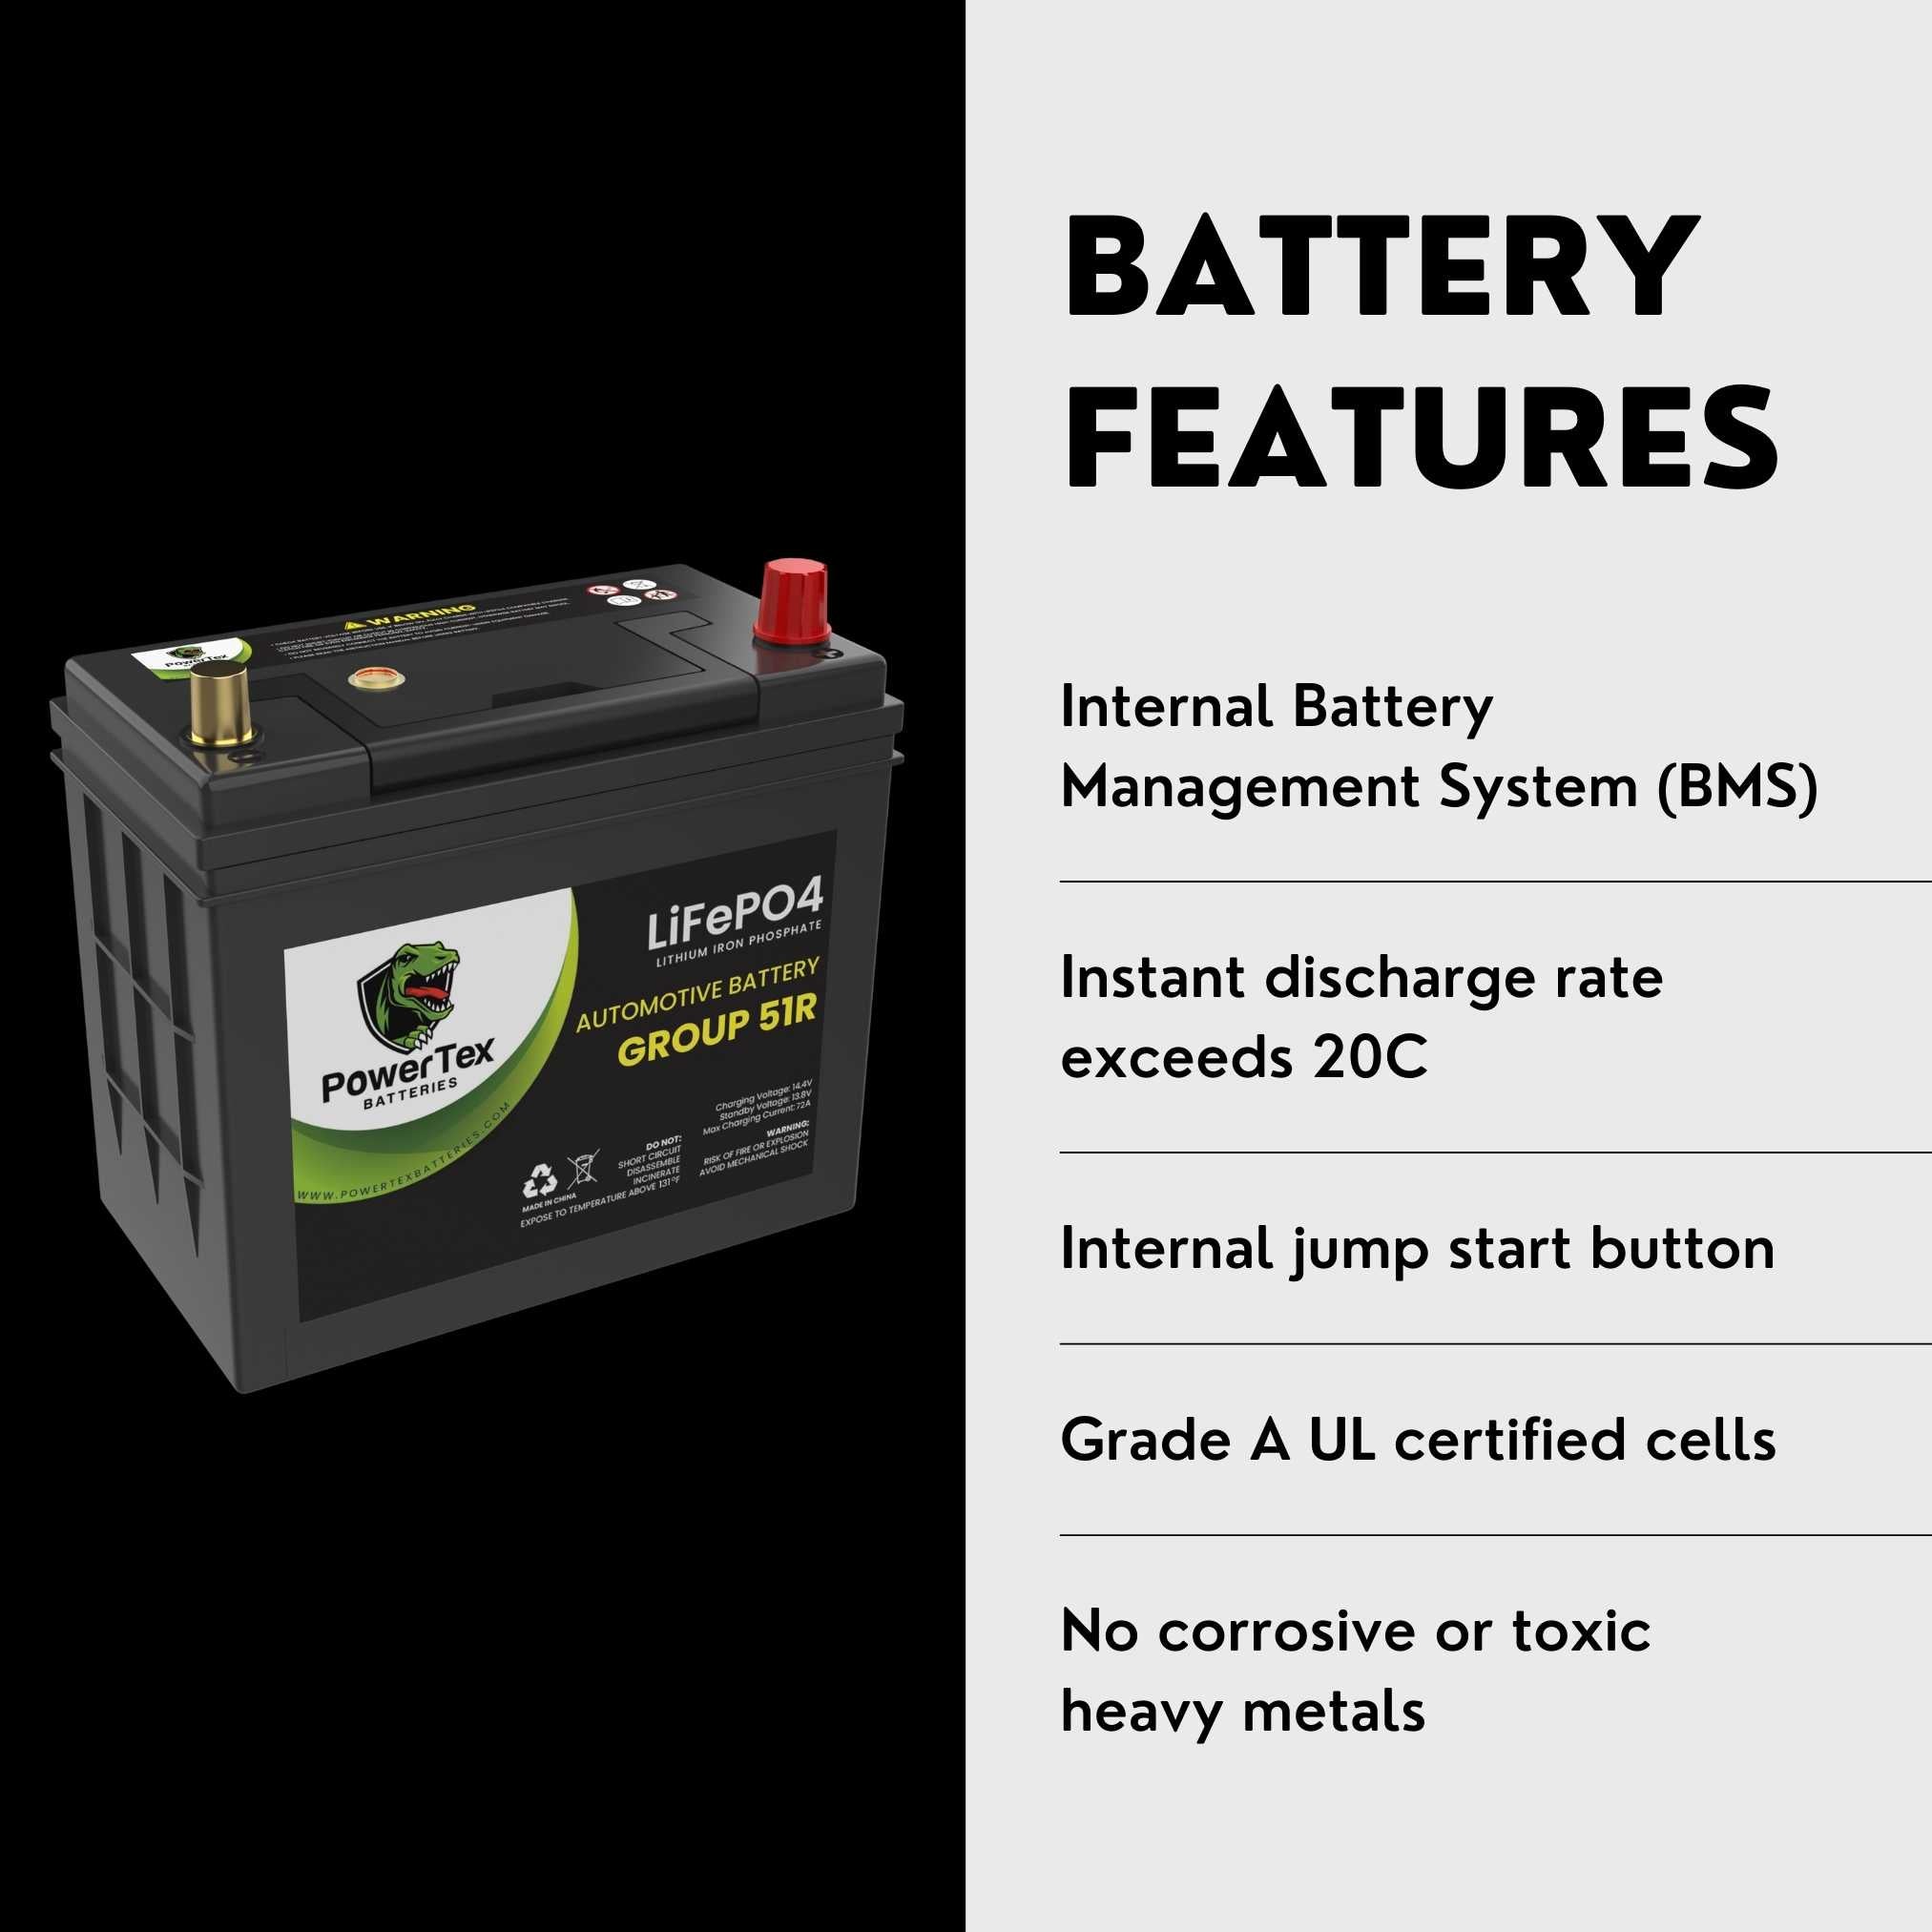 2019 Nissan GT-R Car Battery BCI Group 51R Lithium LiFePO4 Automotive Battery